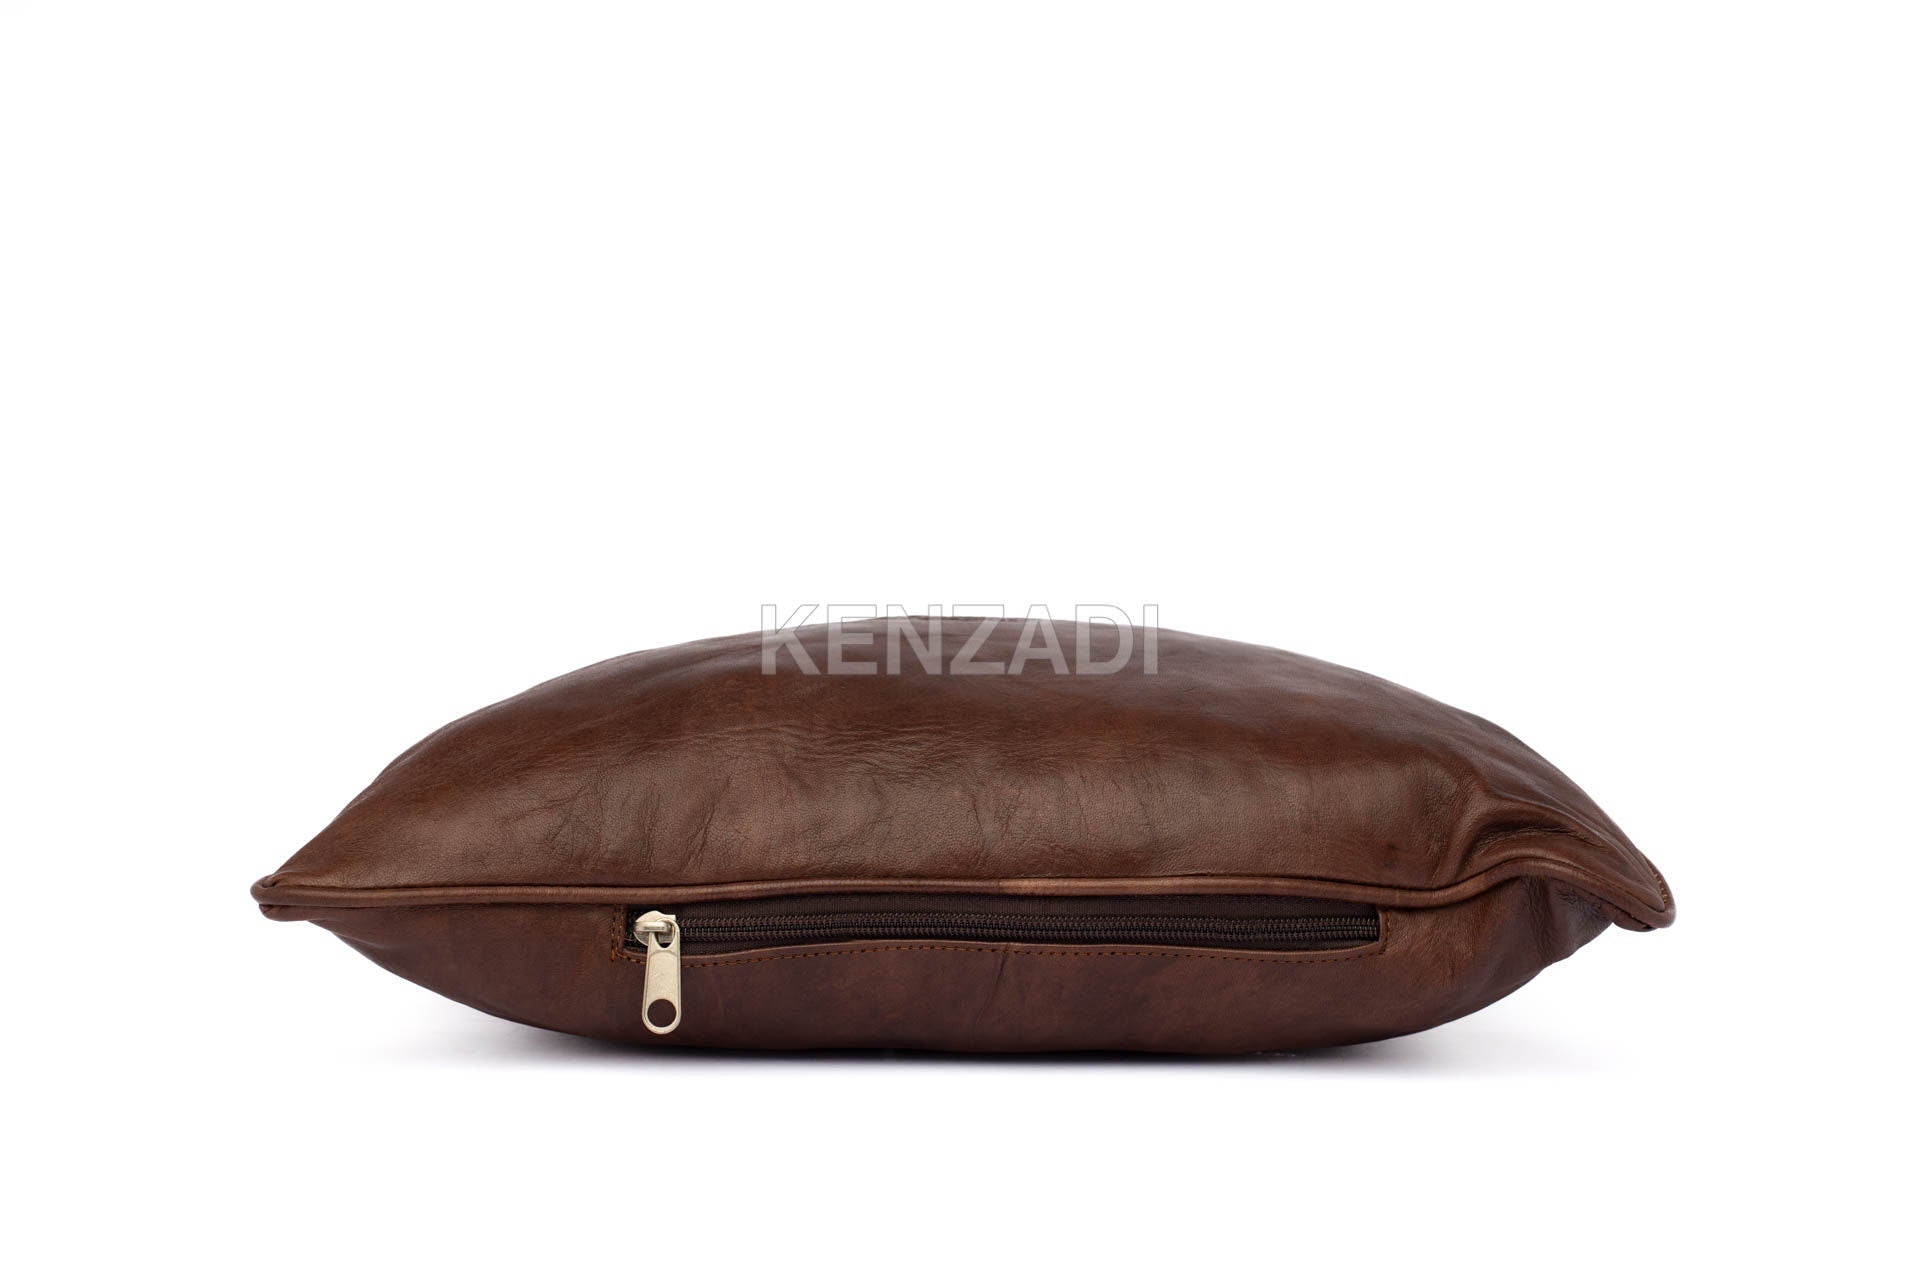 Moroccan Leather Pillow, Brown traditional Throw Pillow Case by Kenzadi - Handmade by My Poufs